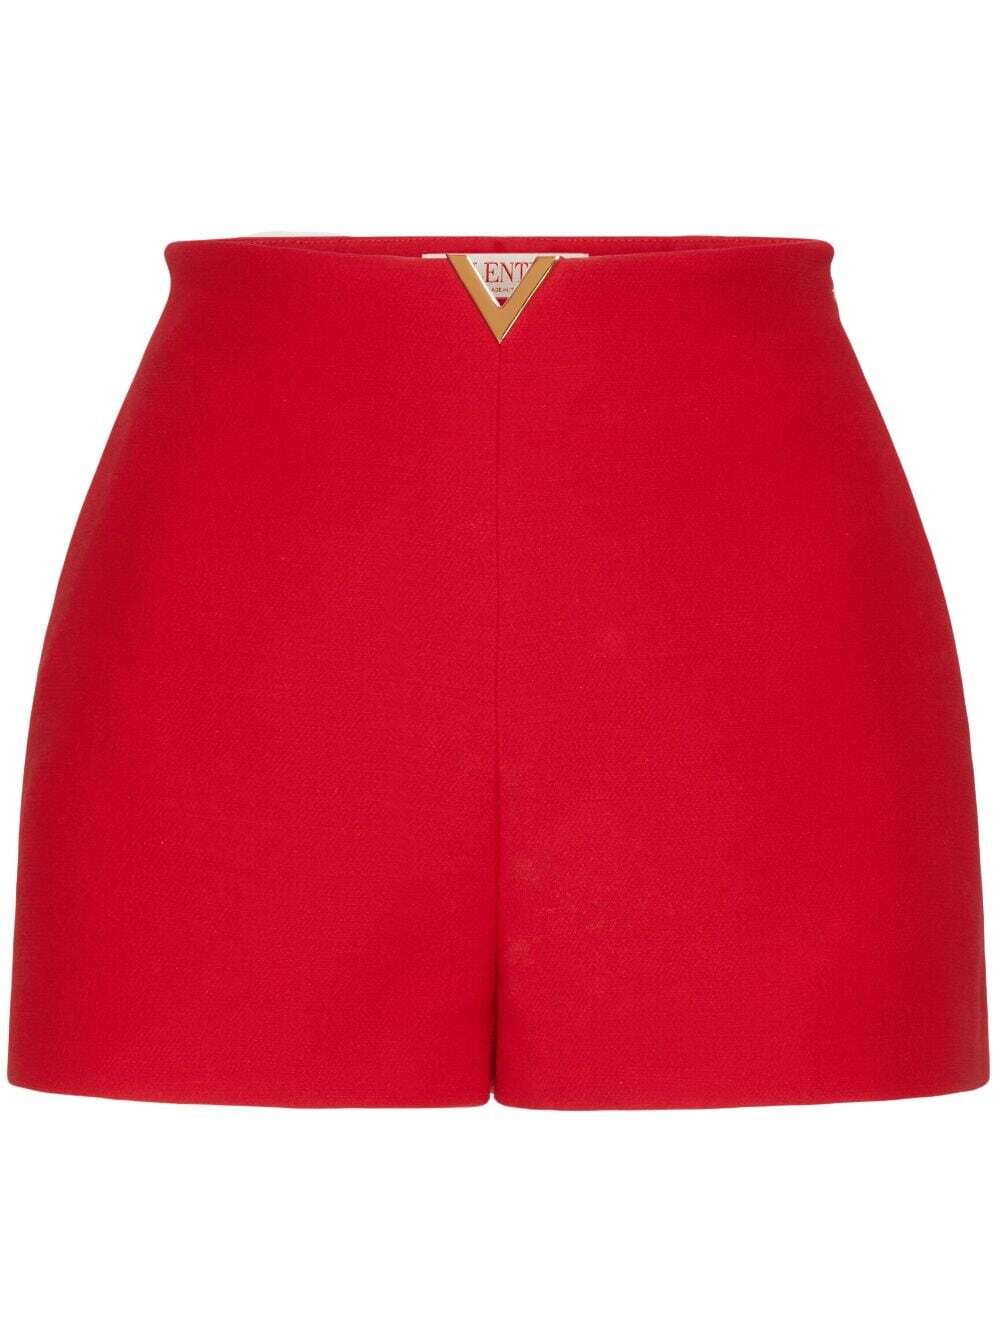 Crepe Couture Short